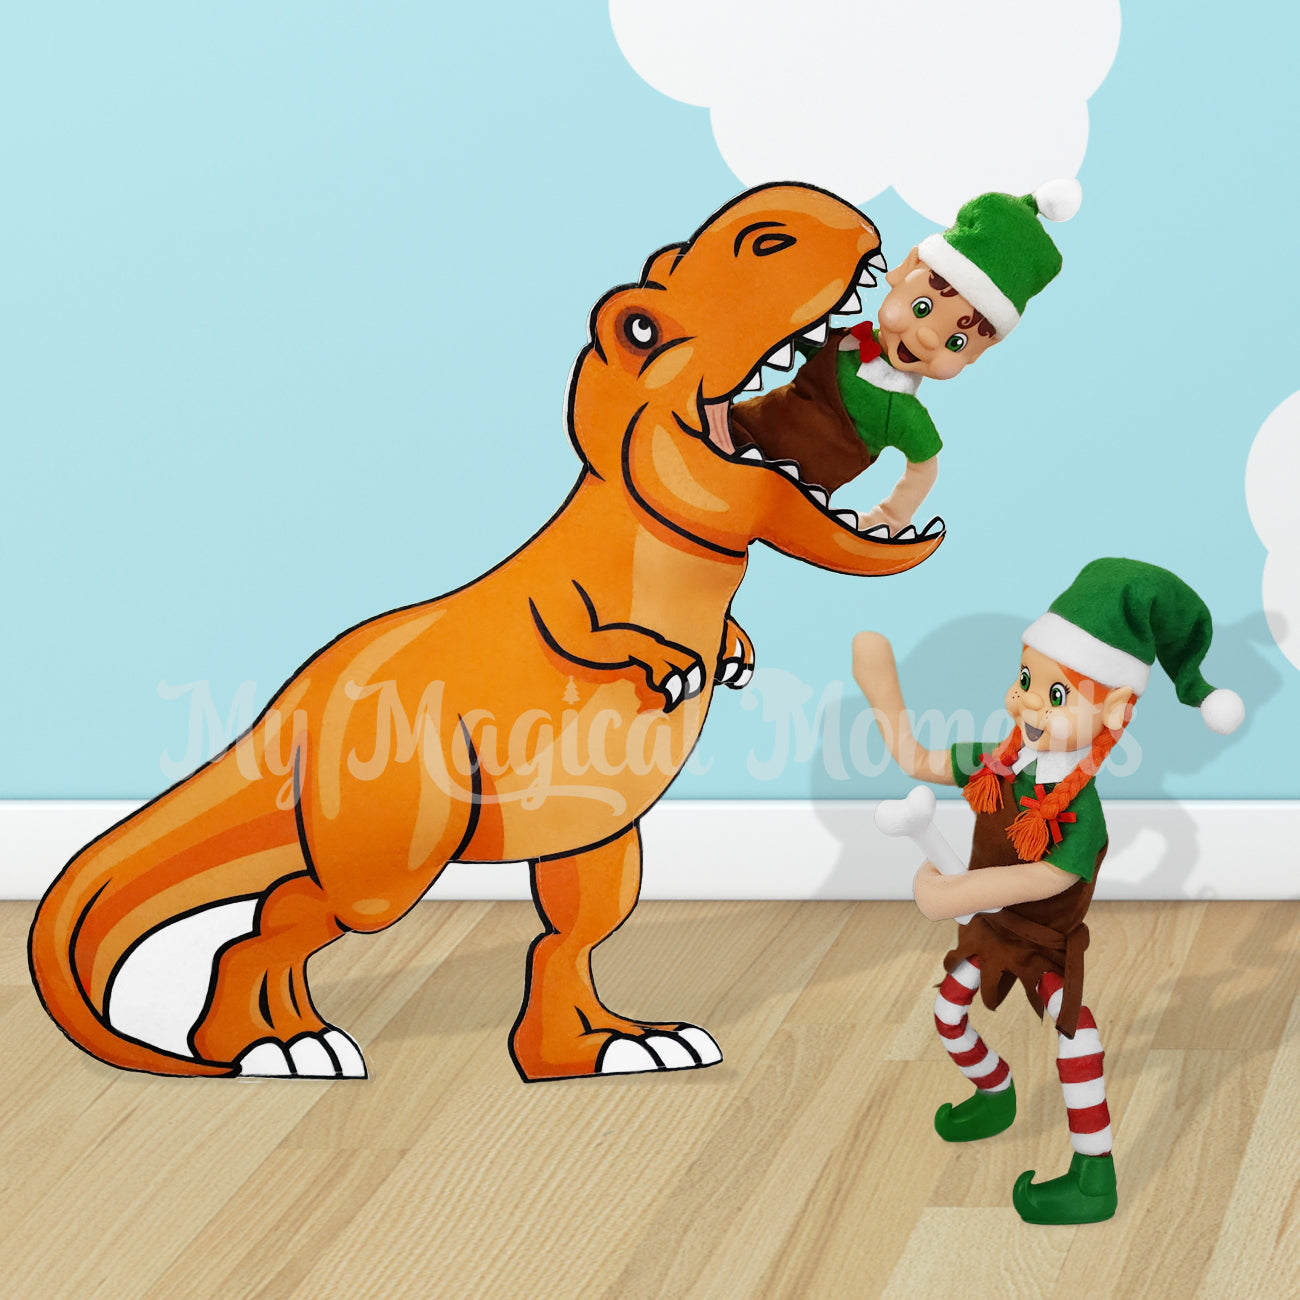 Dinosaur Outfit Worn by Elf for Christmas By My Magical Moments